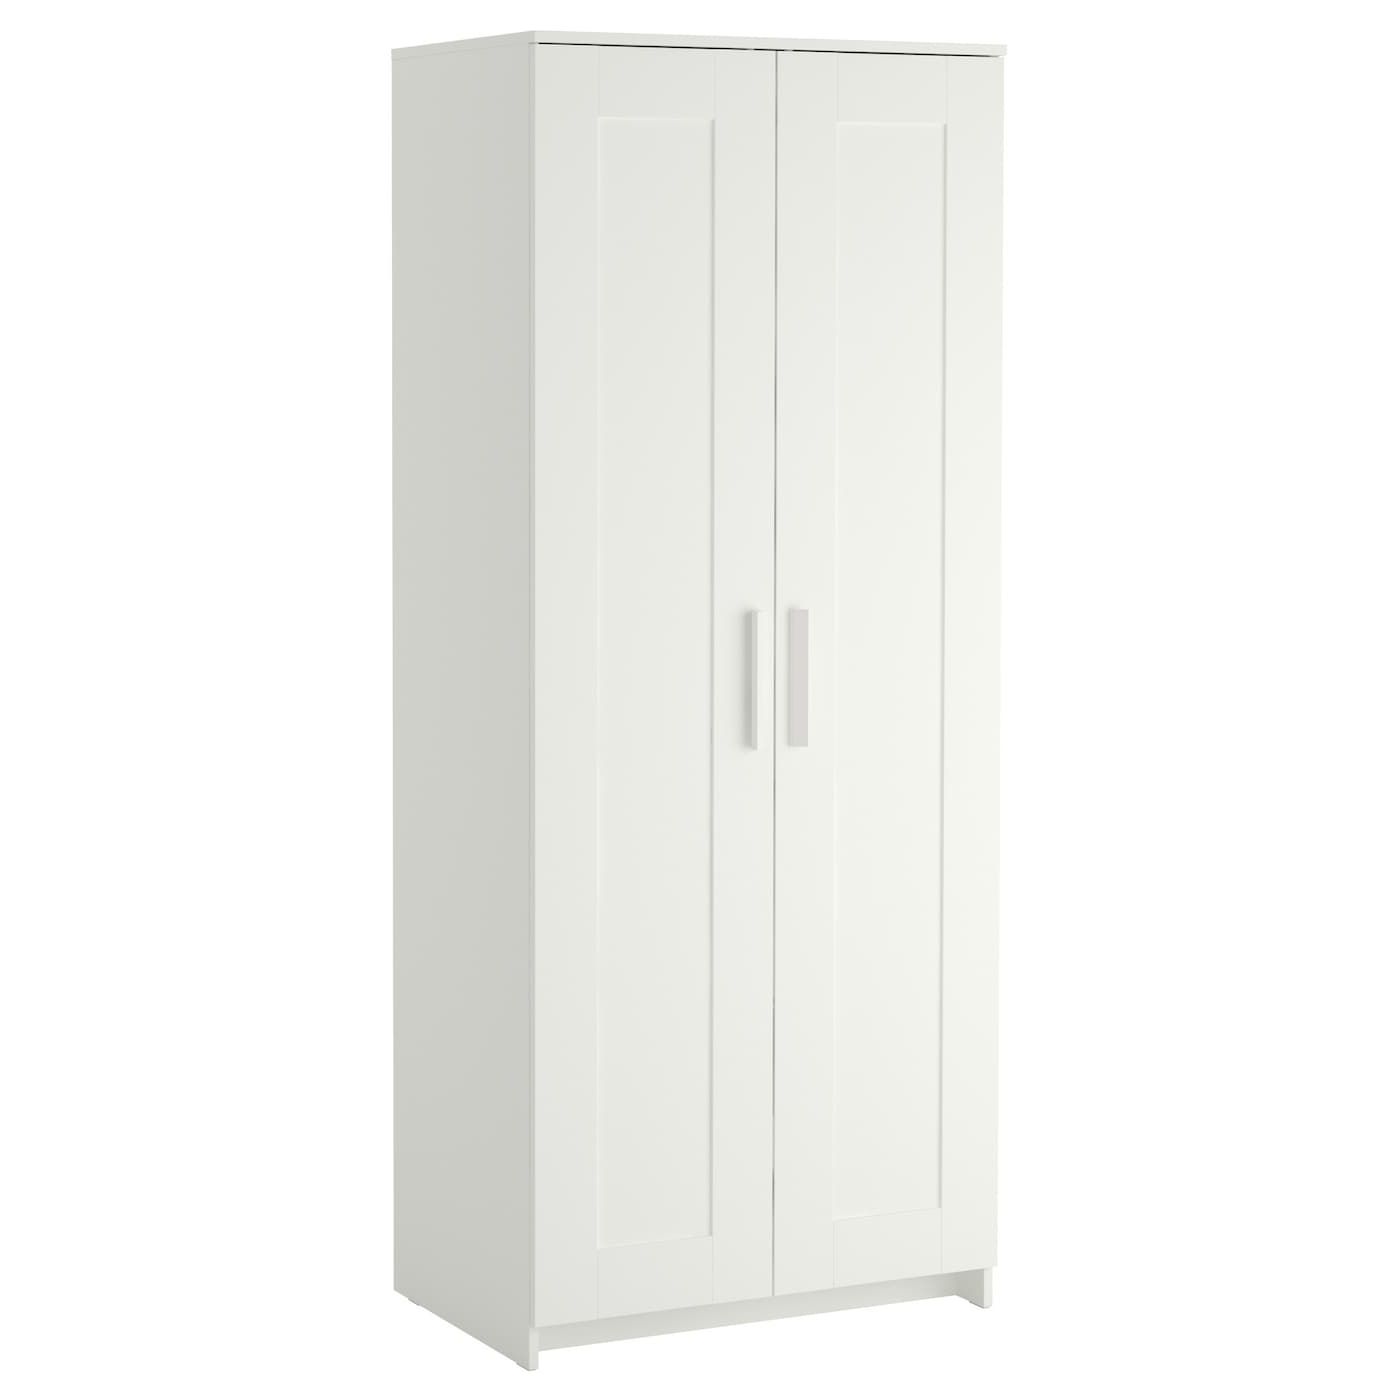 Widely Used 2 Door Wardrobes Throughout Brimnes Wardrobe With 2 Doors, White, 30 3/4x74 3/4" – Ikea (Photo 1 of 10)